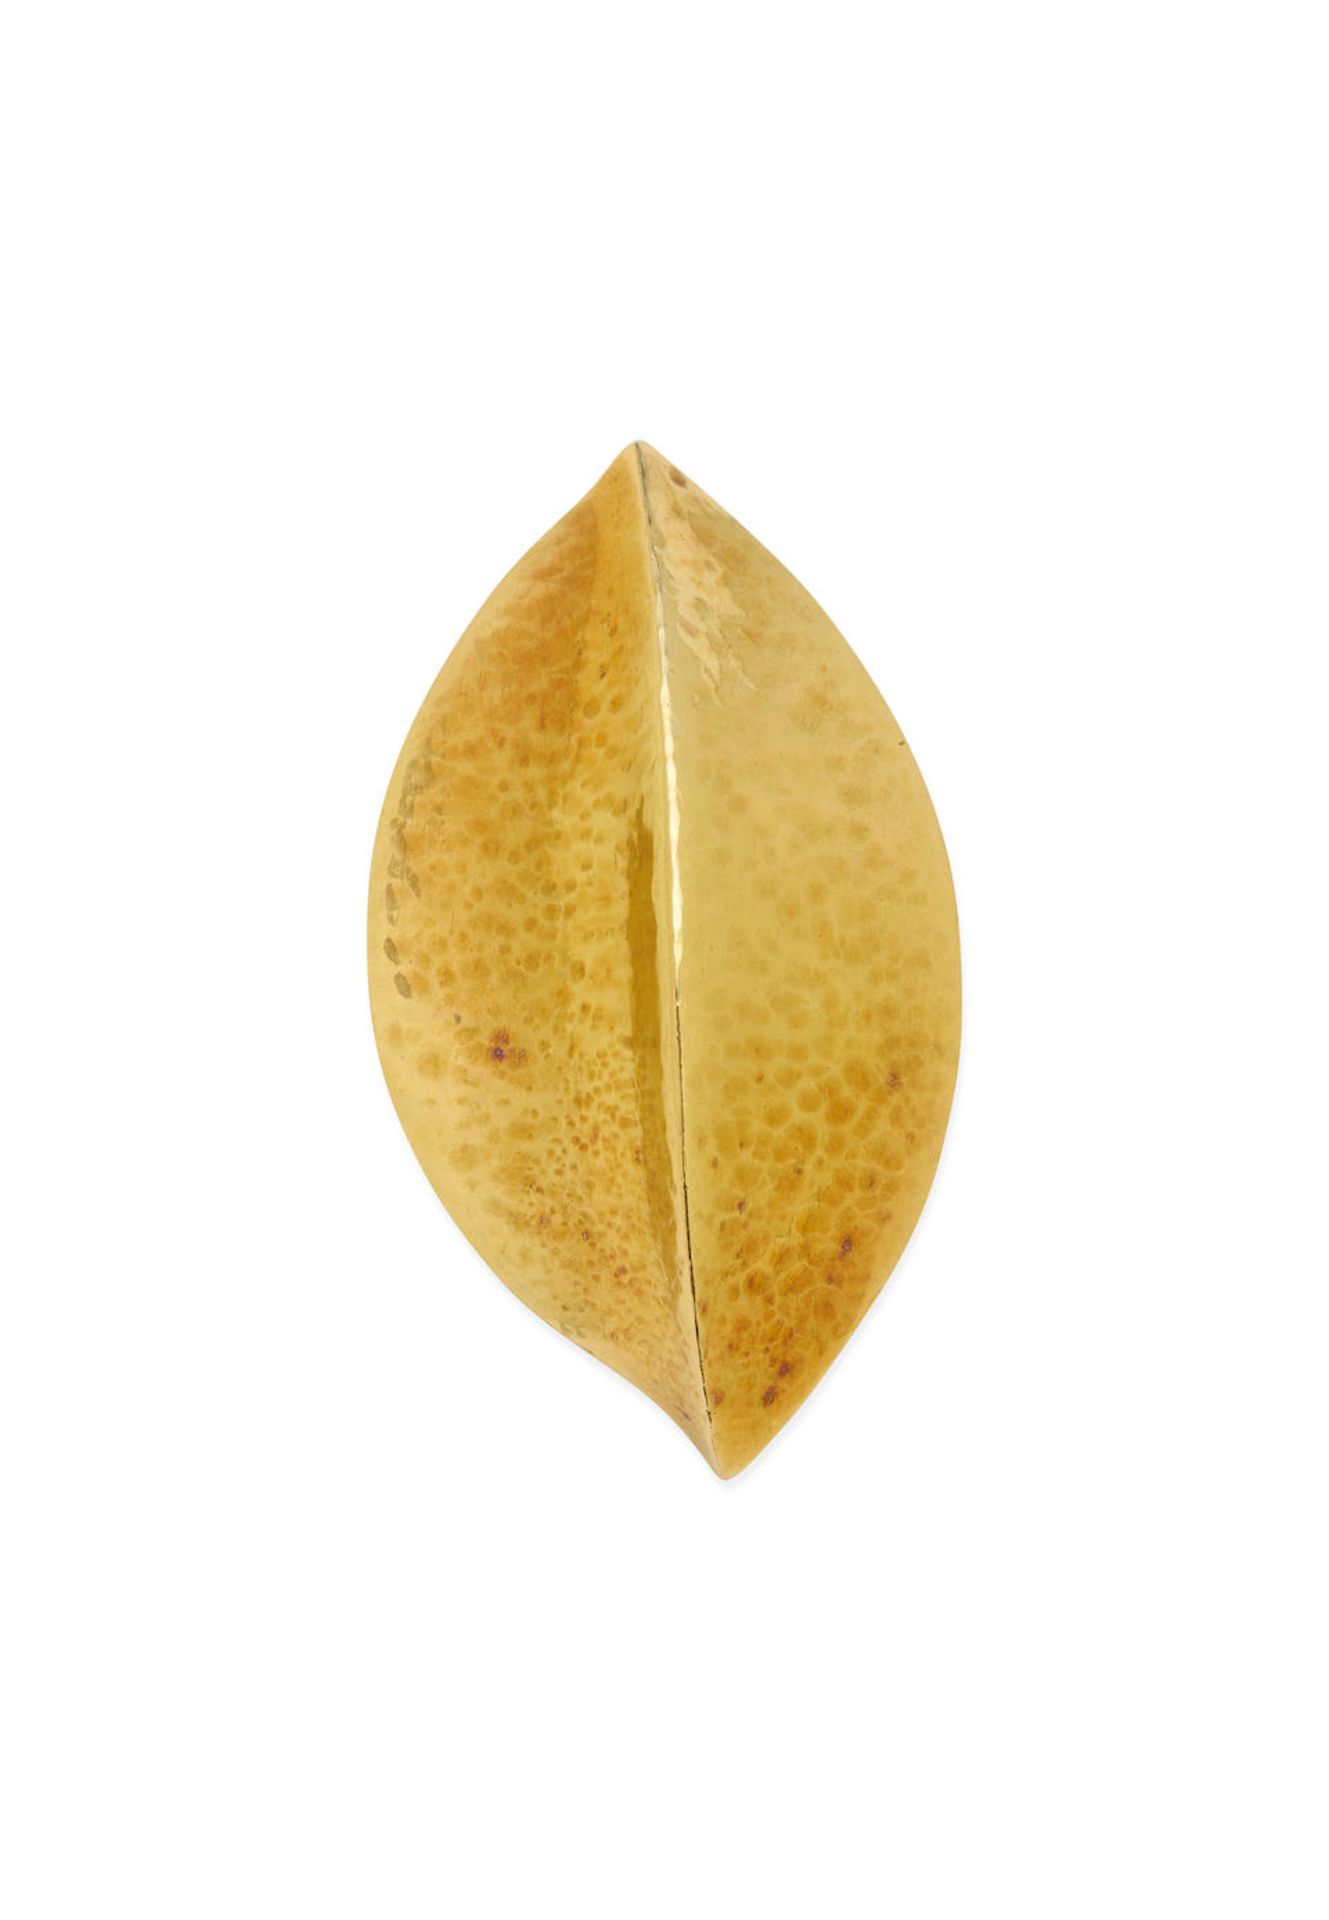 RIONORE OF KILKENNY | 18CT GOLD PENDANT